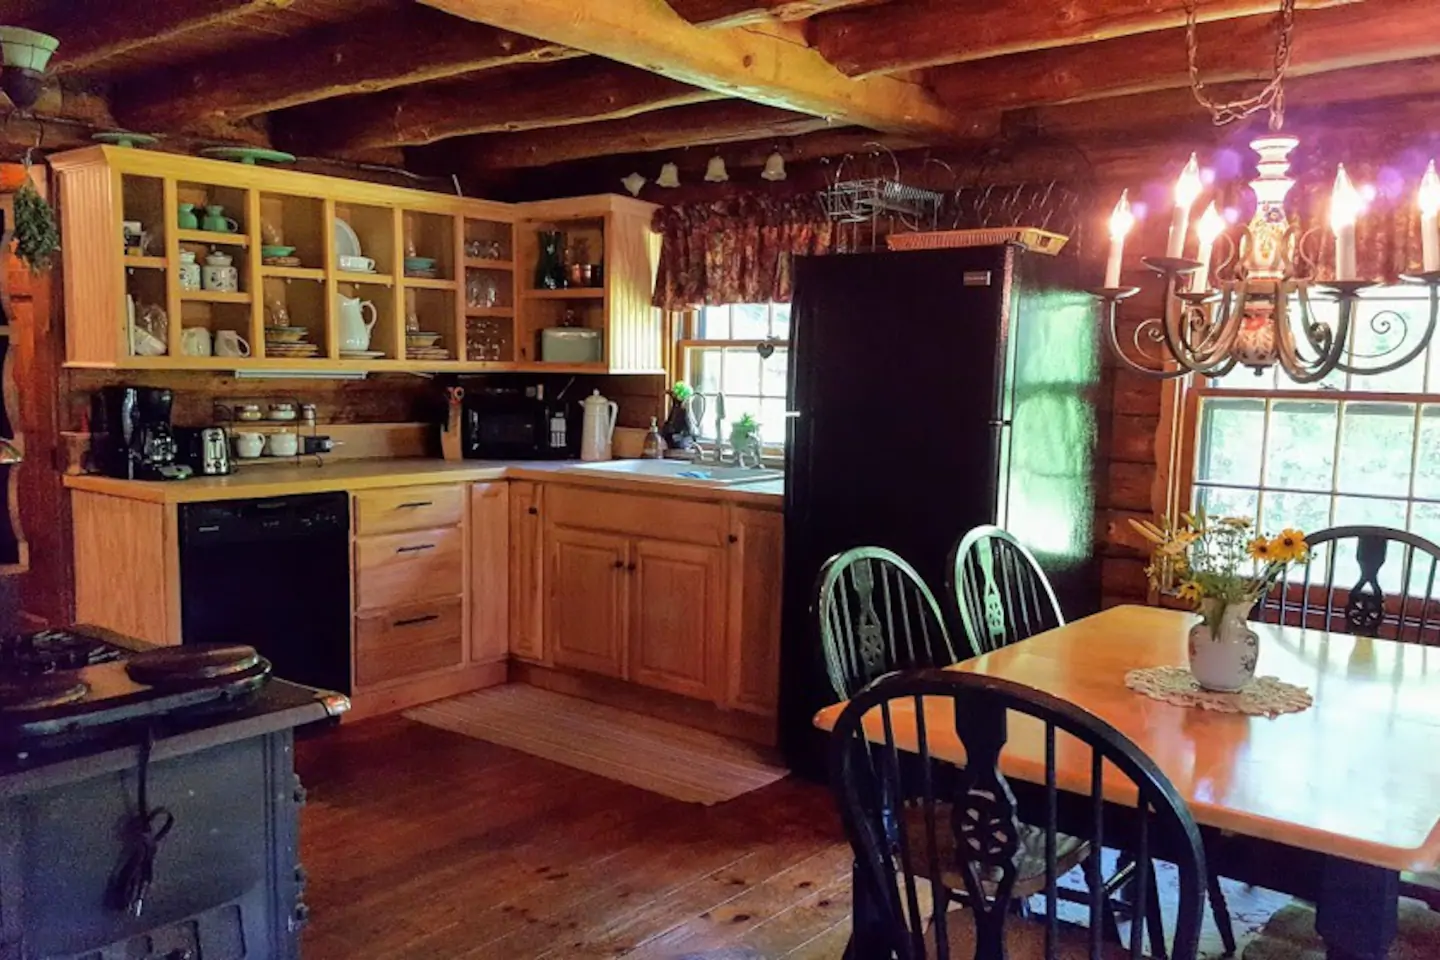 Interior of kitchen with post and beam ceiling